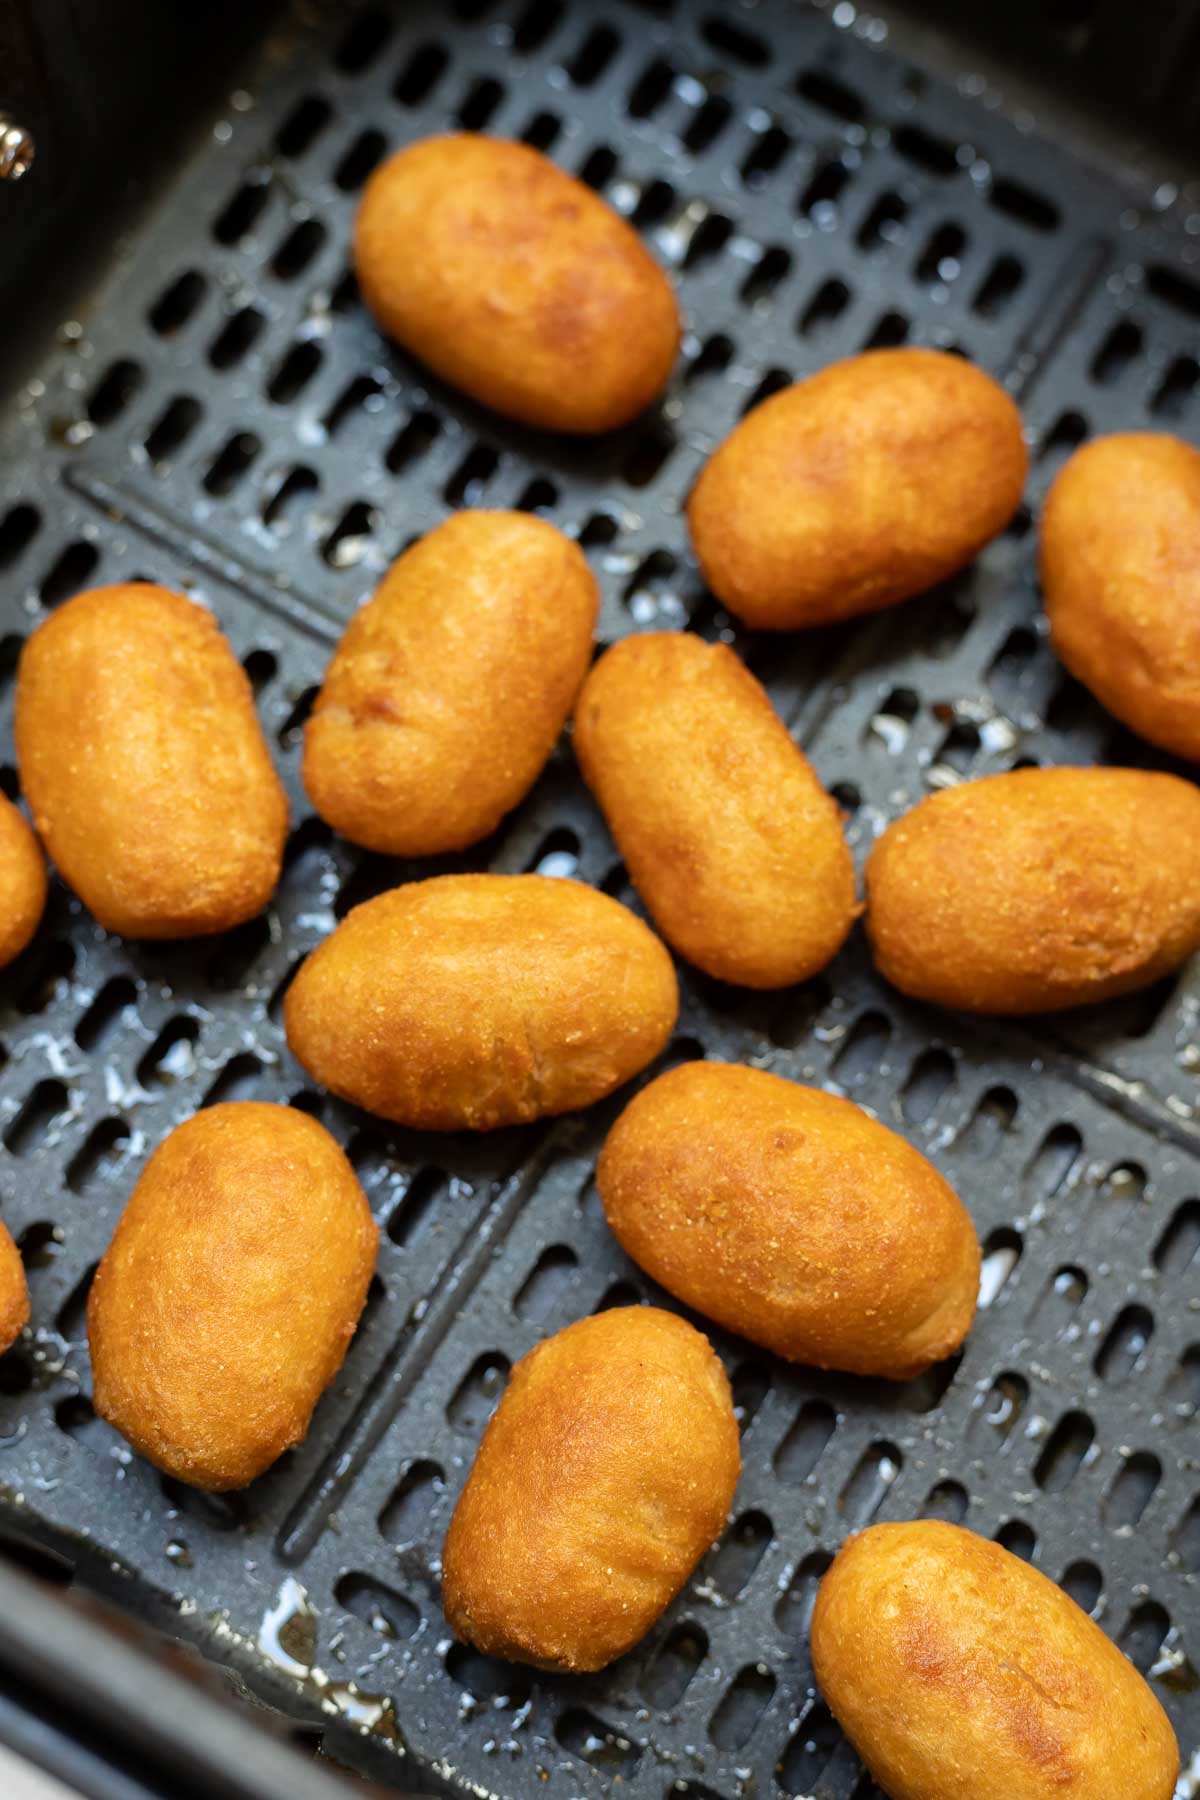 How To Cook Mini Corn Dogs In Air Fryer - Tasty Air Fryer Recipes